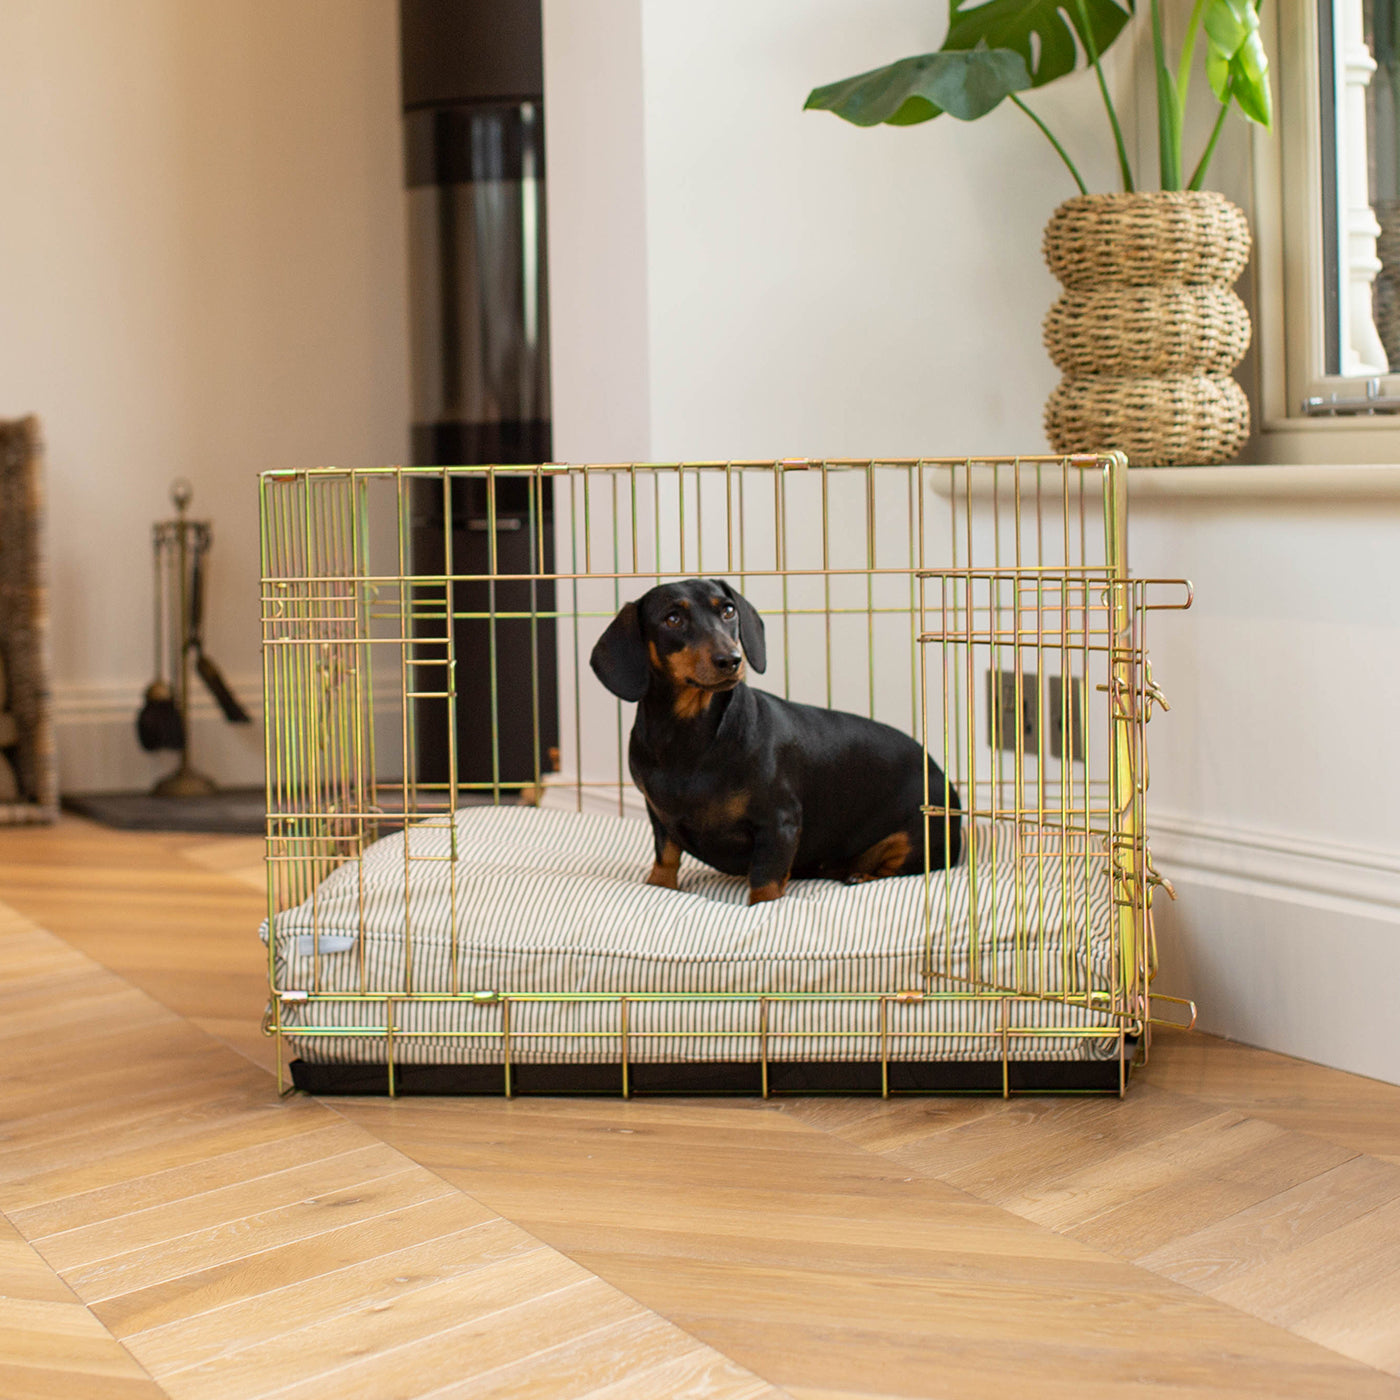 Luxury Gold Dog Cage Set With Cushion, The Perfect Dog Crate For The Ultimate Naptime, Available Now at Lords & Labradors US